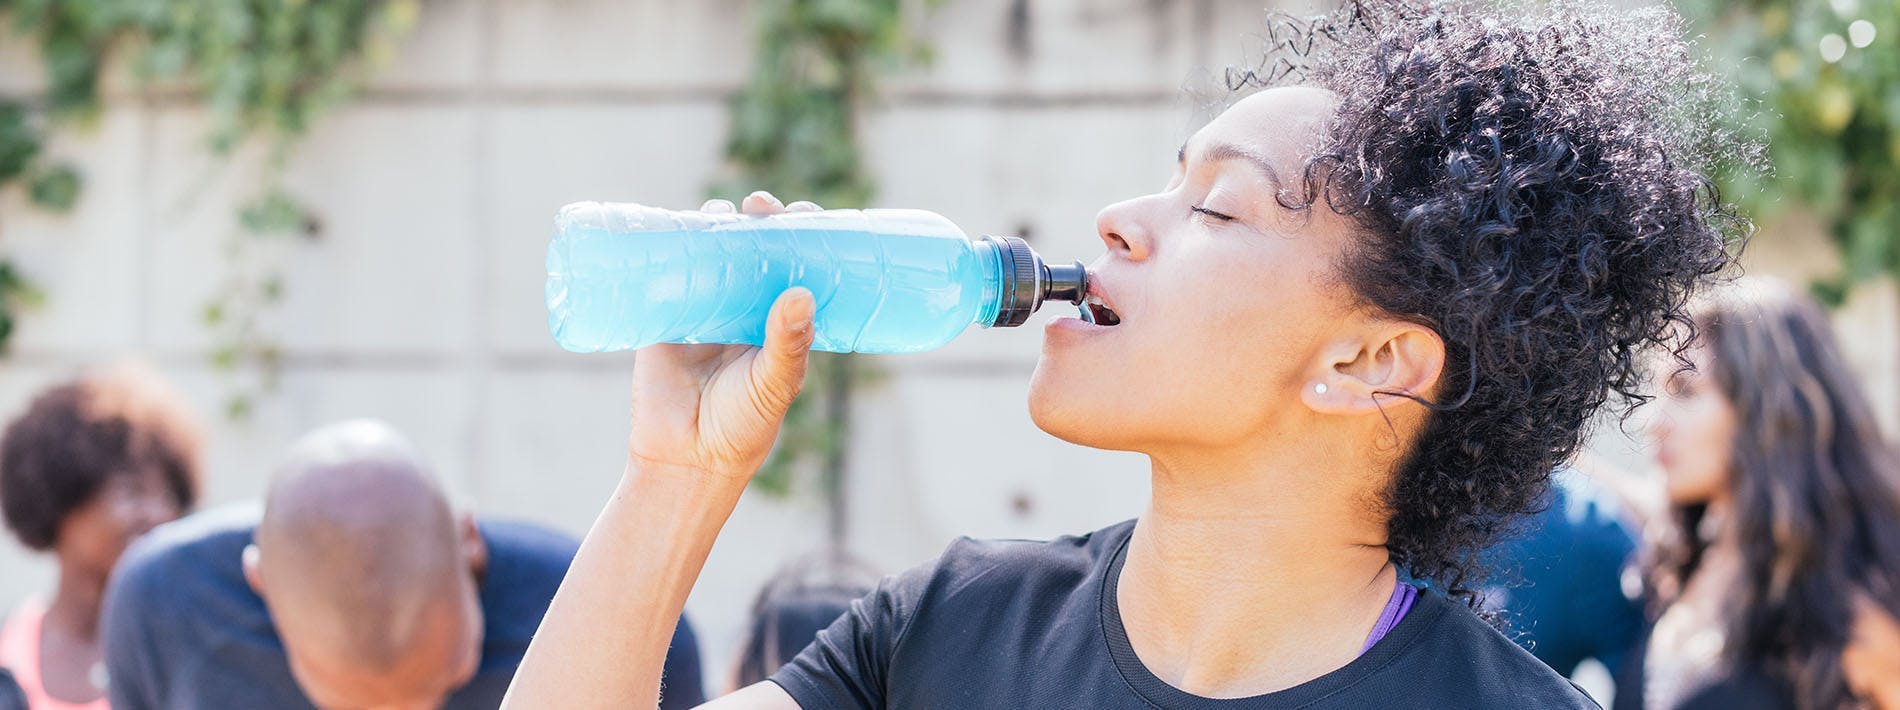 Woman Avoids Dehydration with Bottle of Water